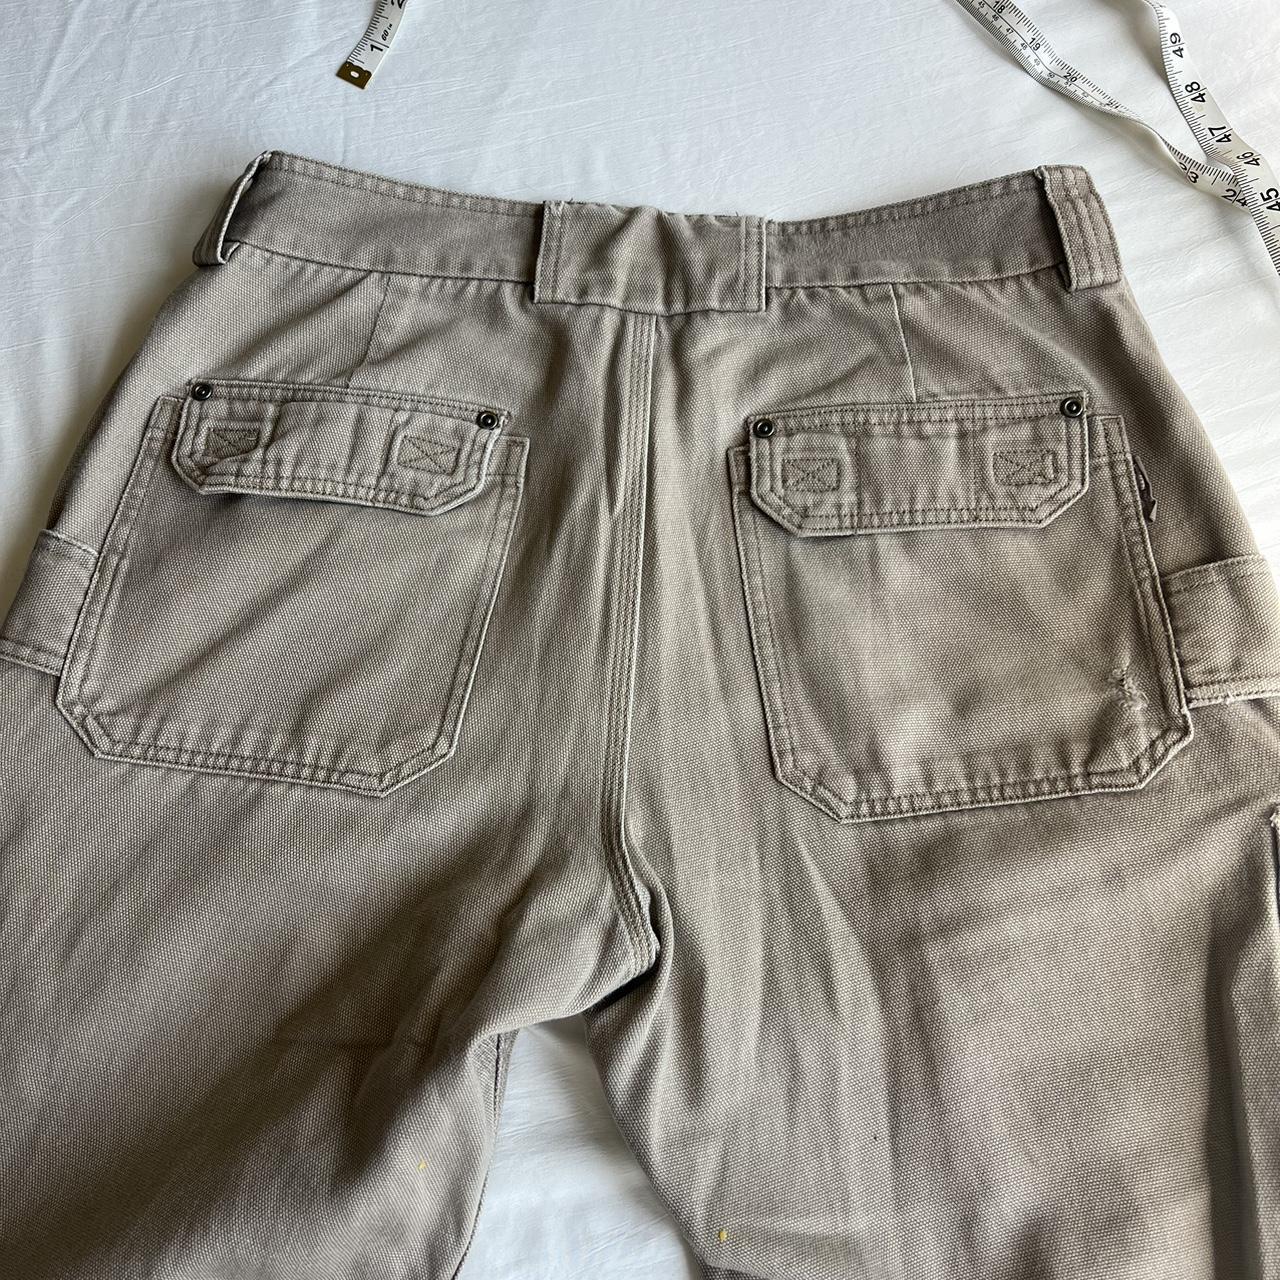 Duluth Trading Company Men's Khaki and Cream Trousers (3)